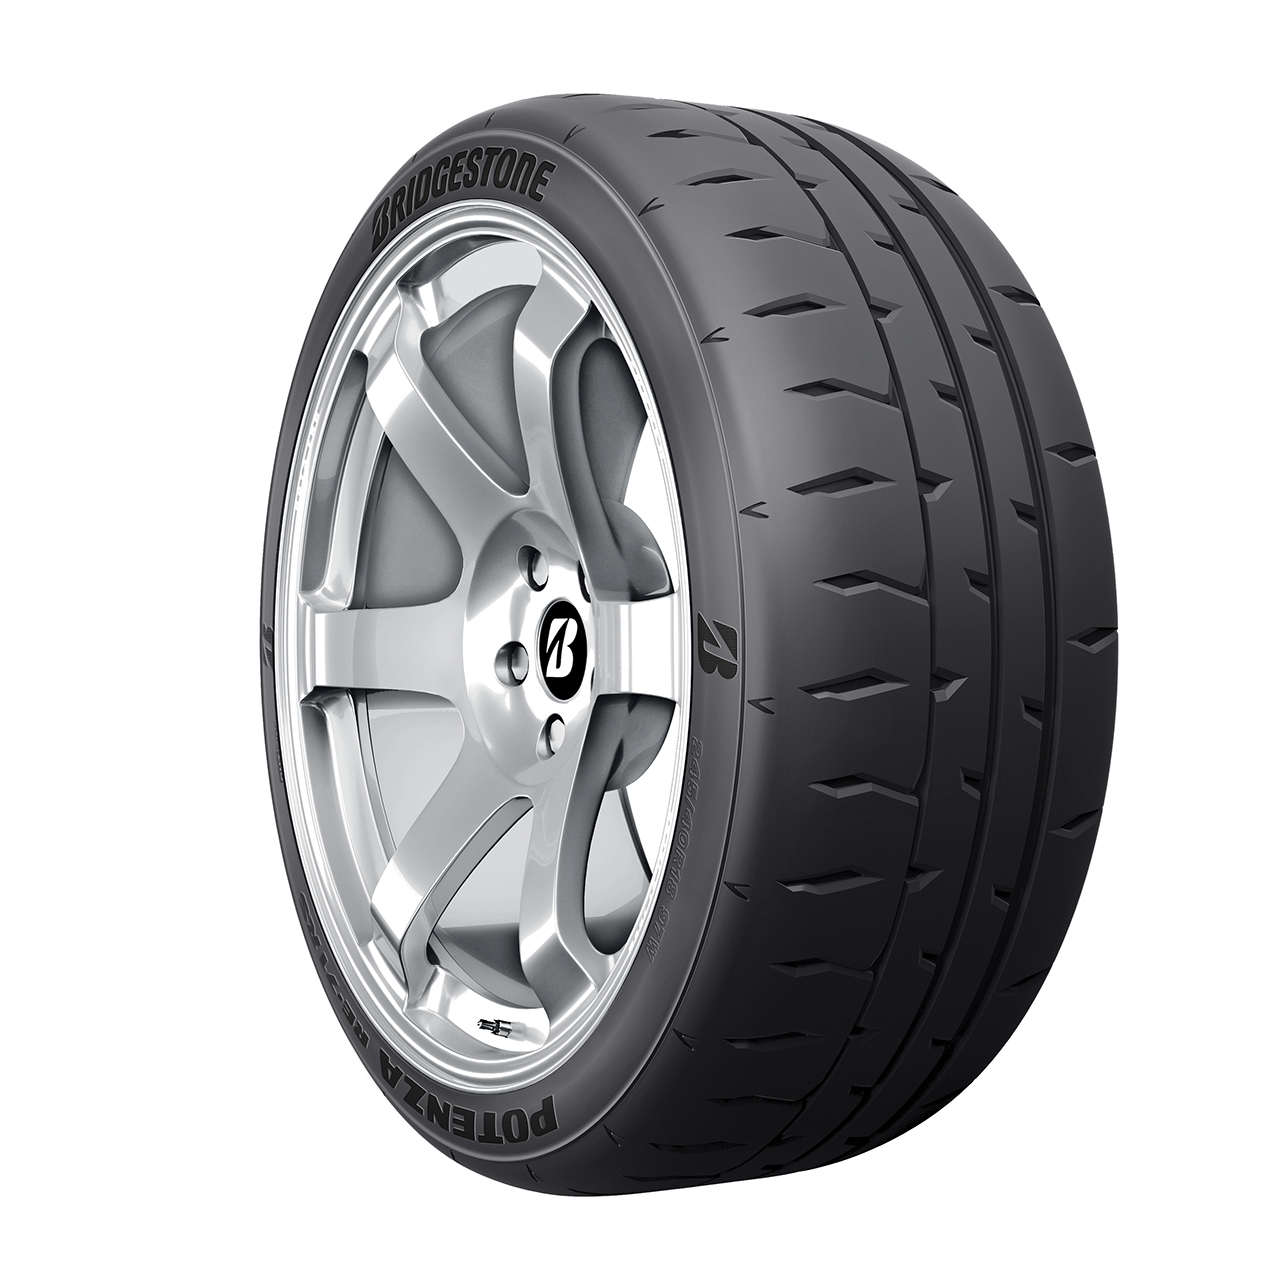 Bridgestone Potenza RE 71RS Tyre Reviews and Tests